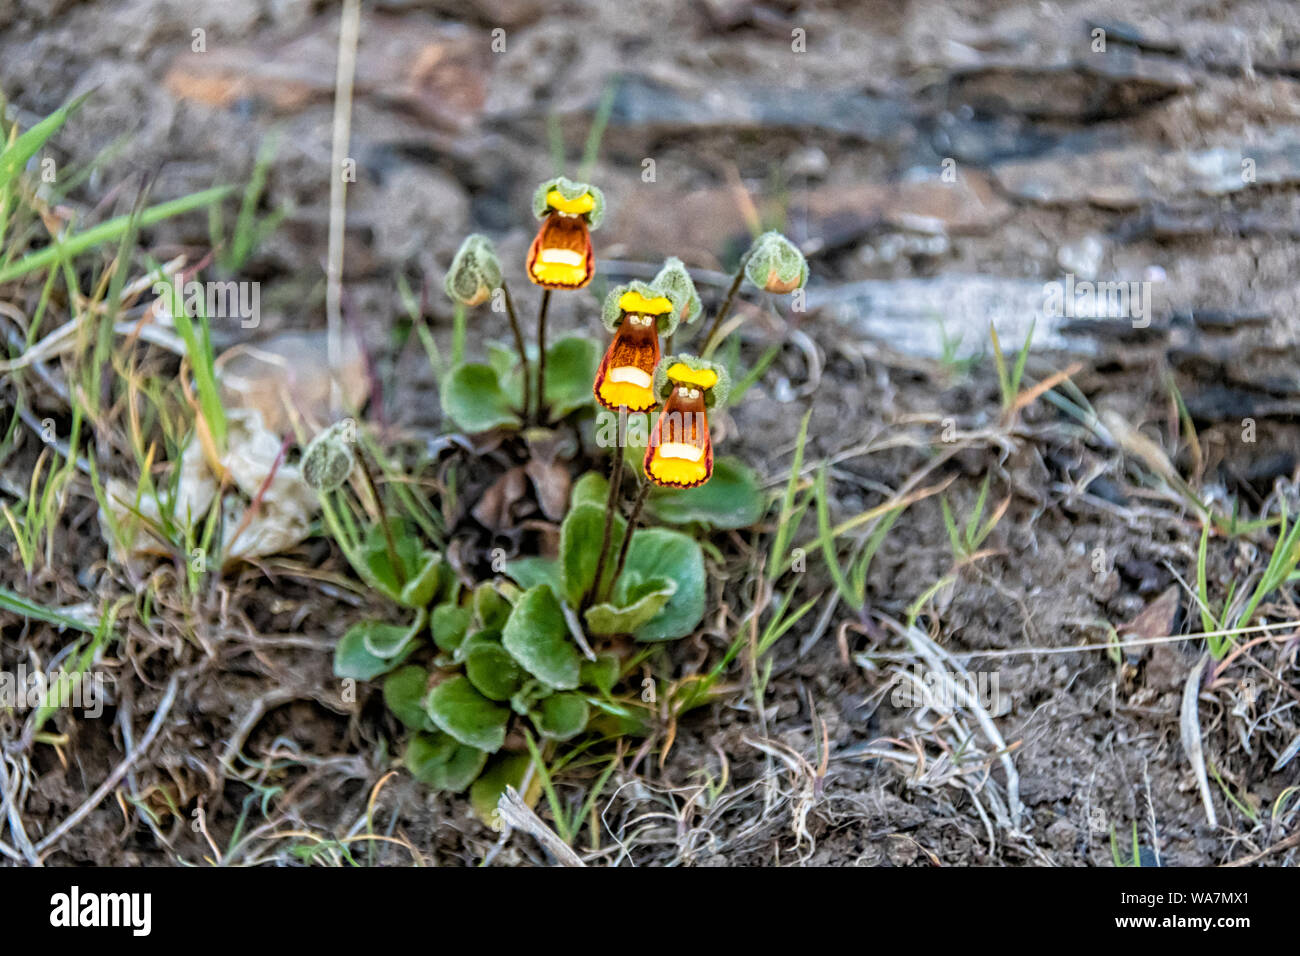 Lady's Slippers flower, Calceolaria fothergillii, Saunders Island, in the Falkland Islands, South Atlantic Ocean Stock Photo